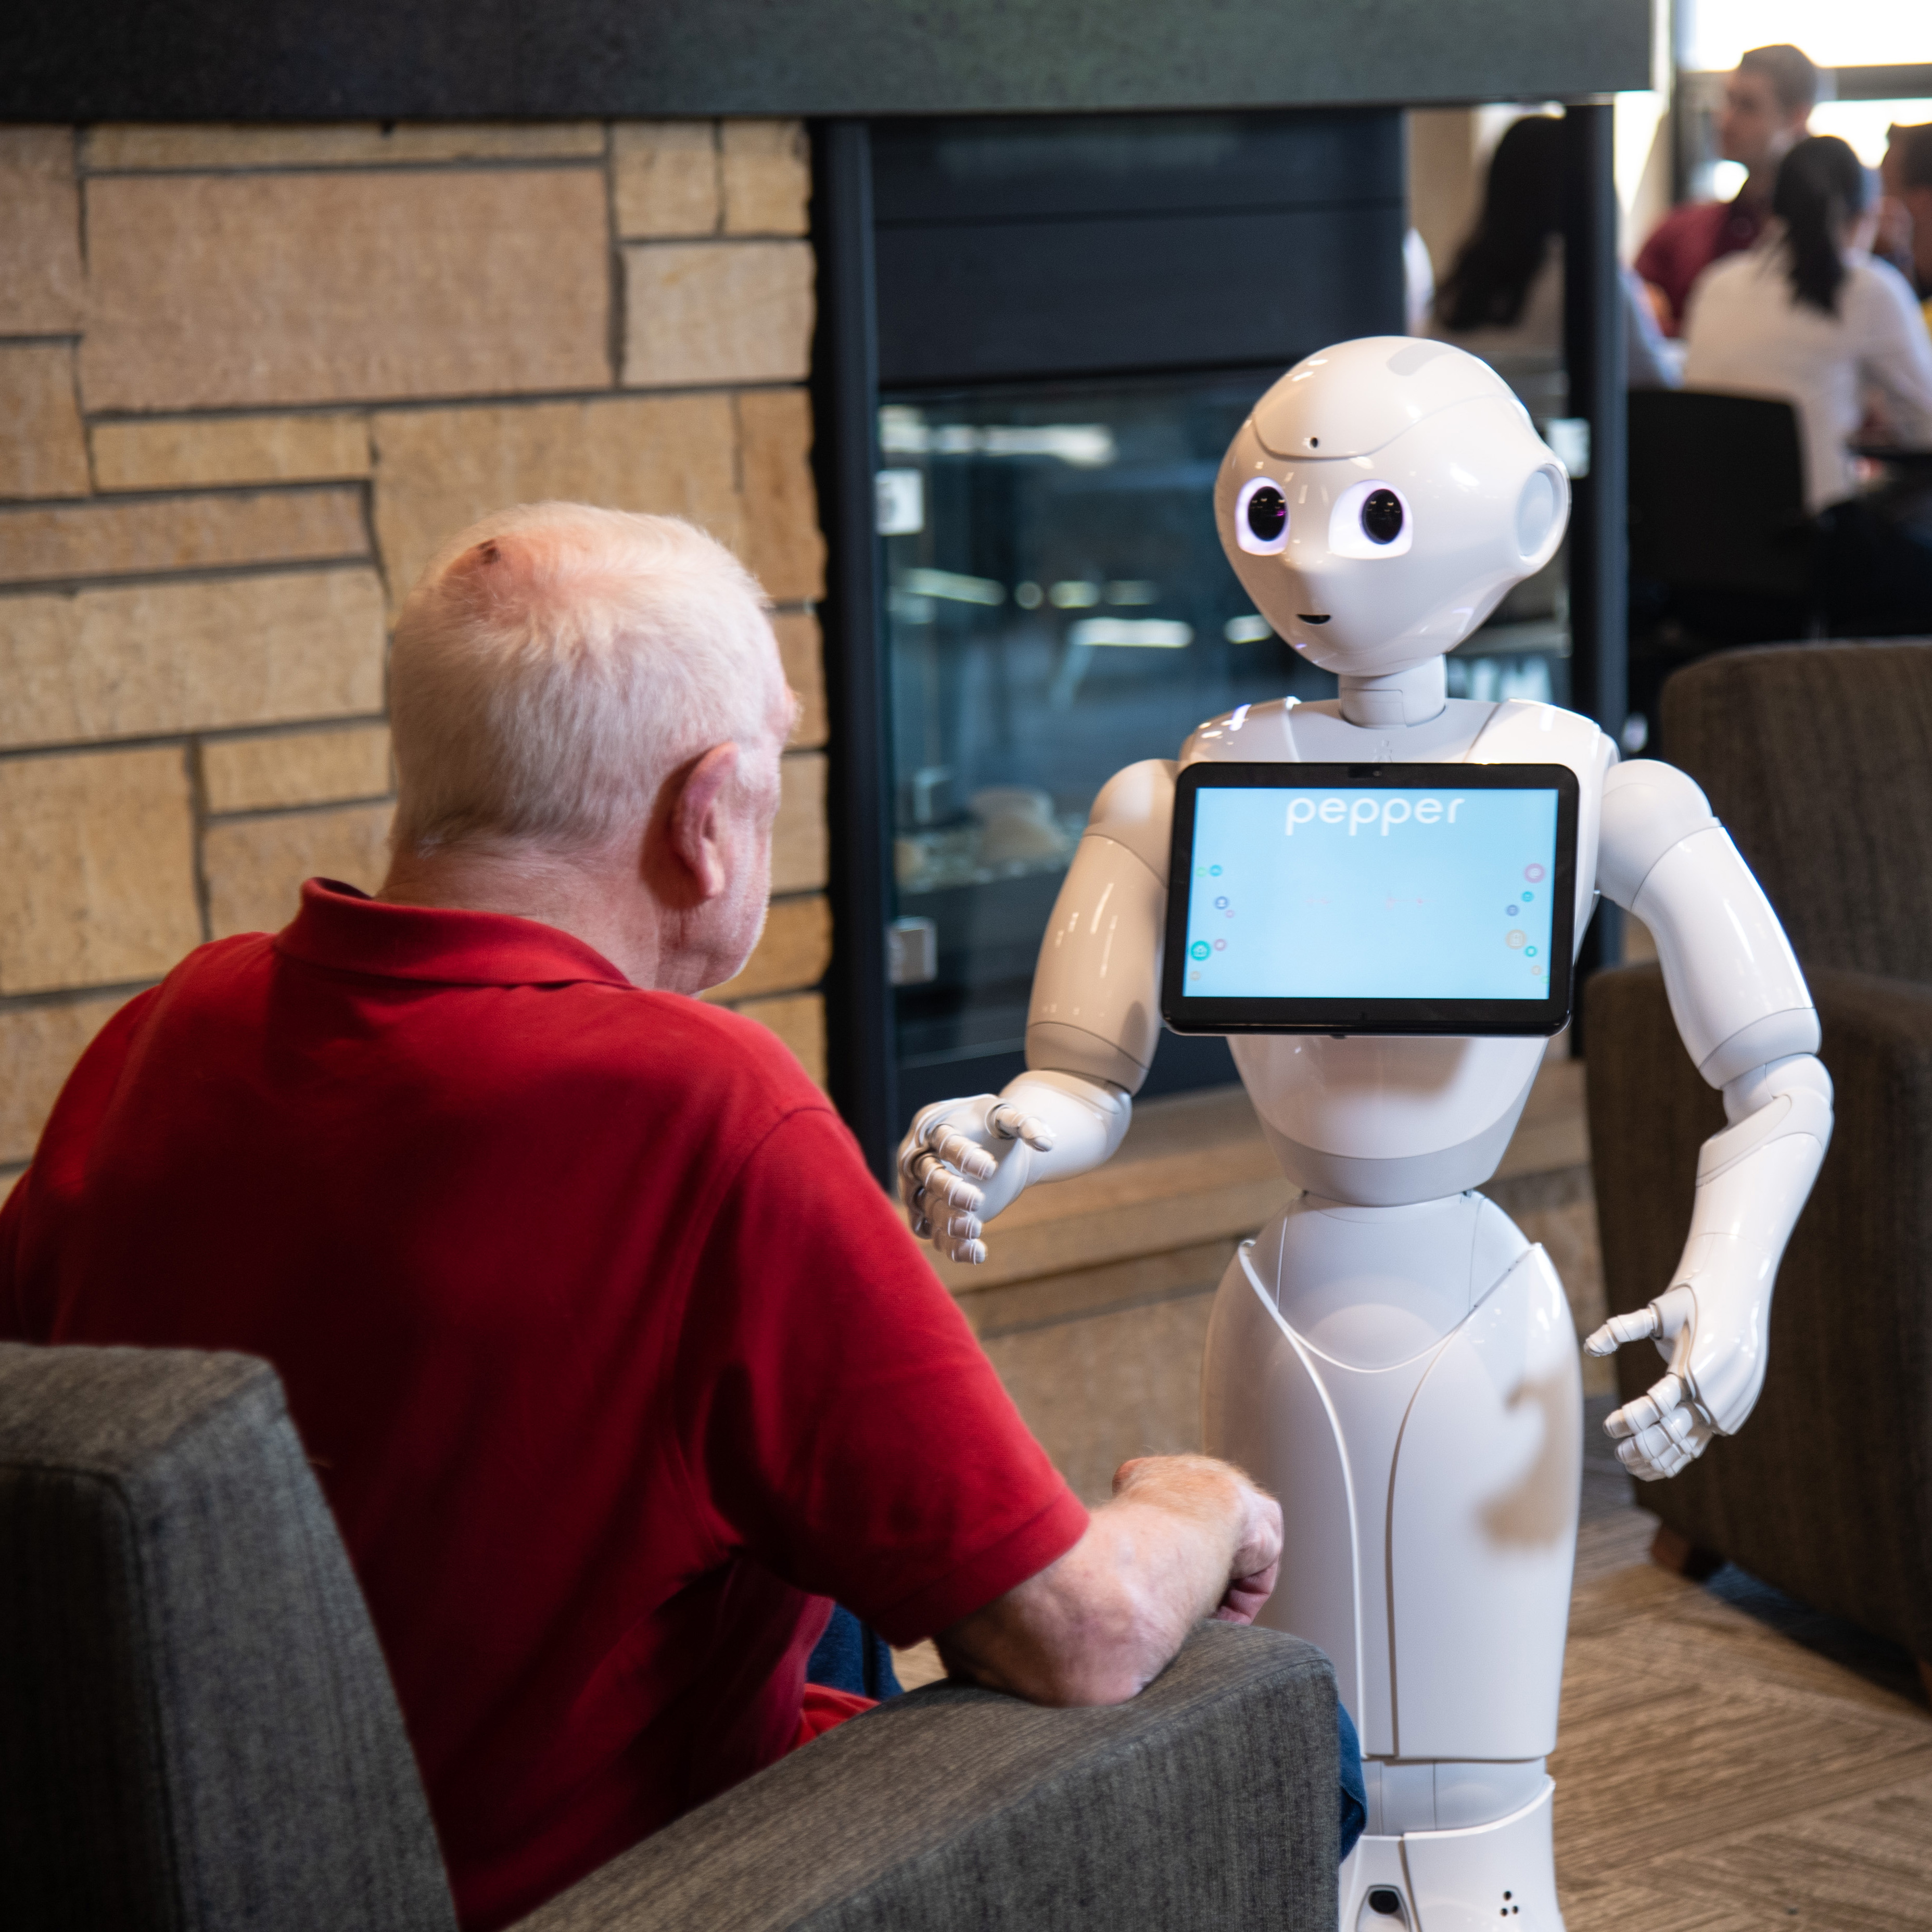 A senior citizen wearing a red shirt interacts with Pepper the robot. 